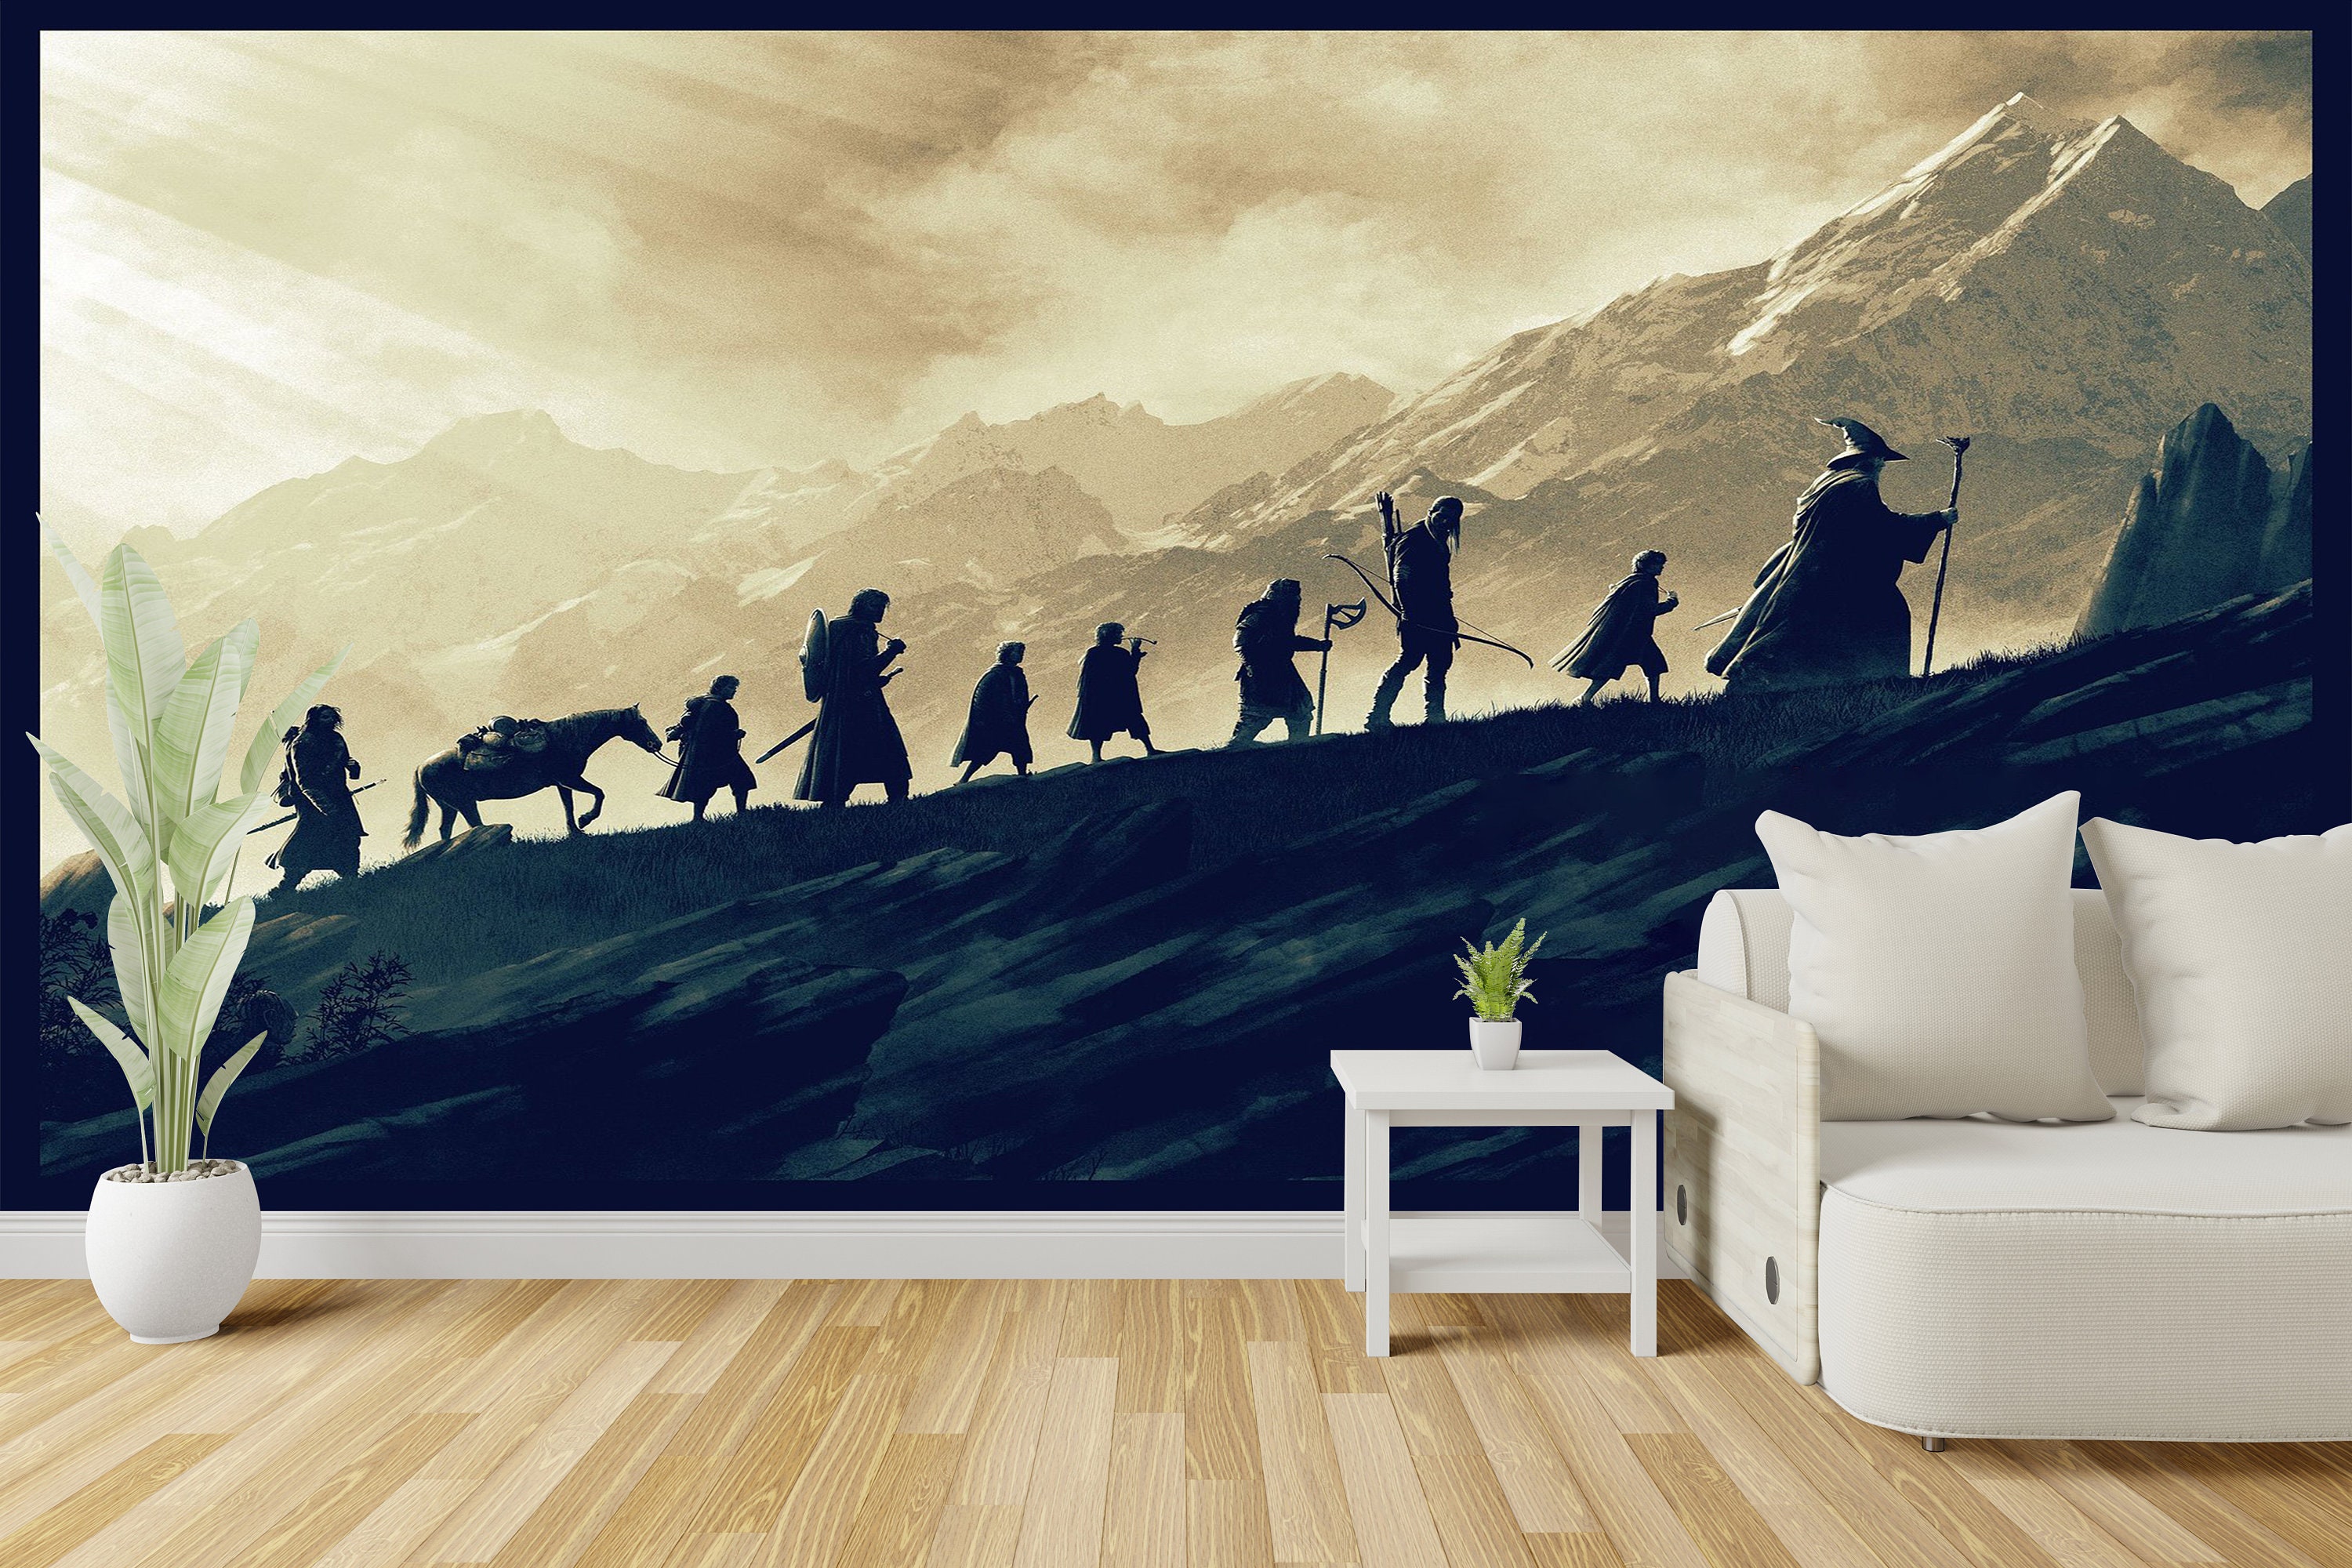 The Lord of the Rings Wallpapers (96+ images inside)